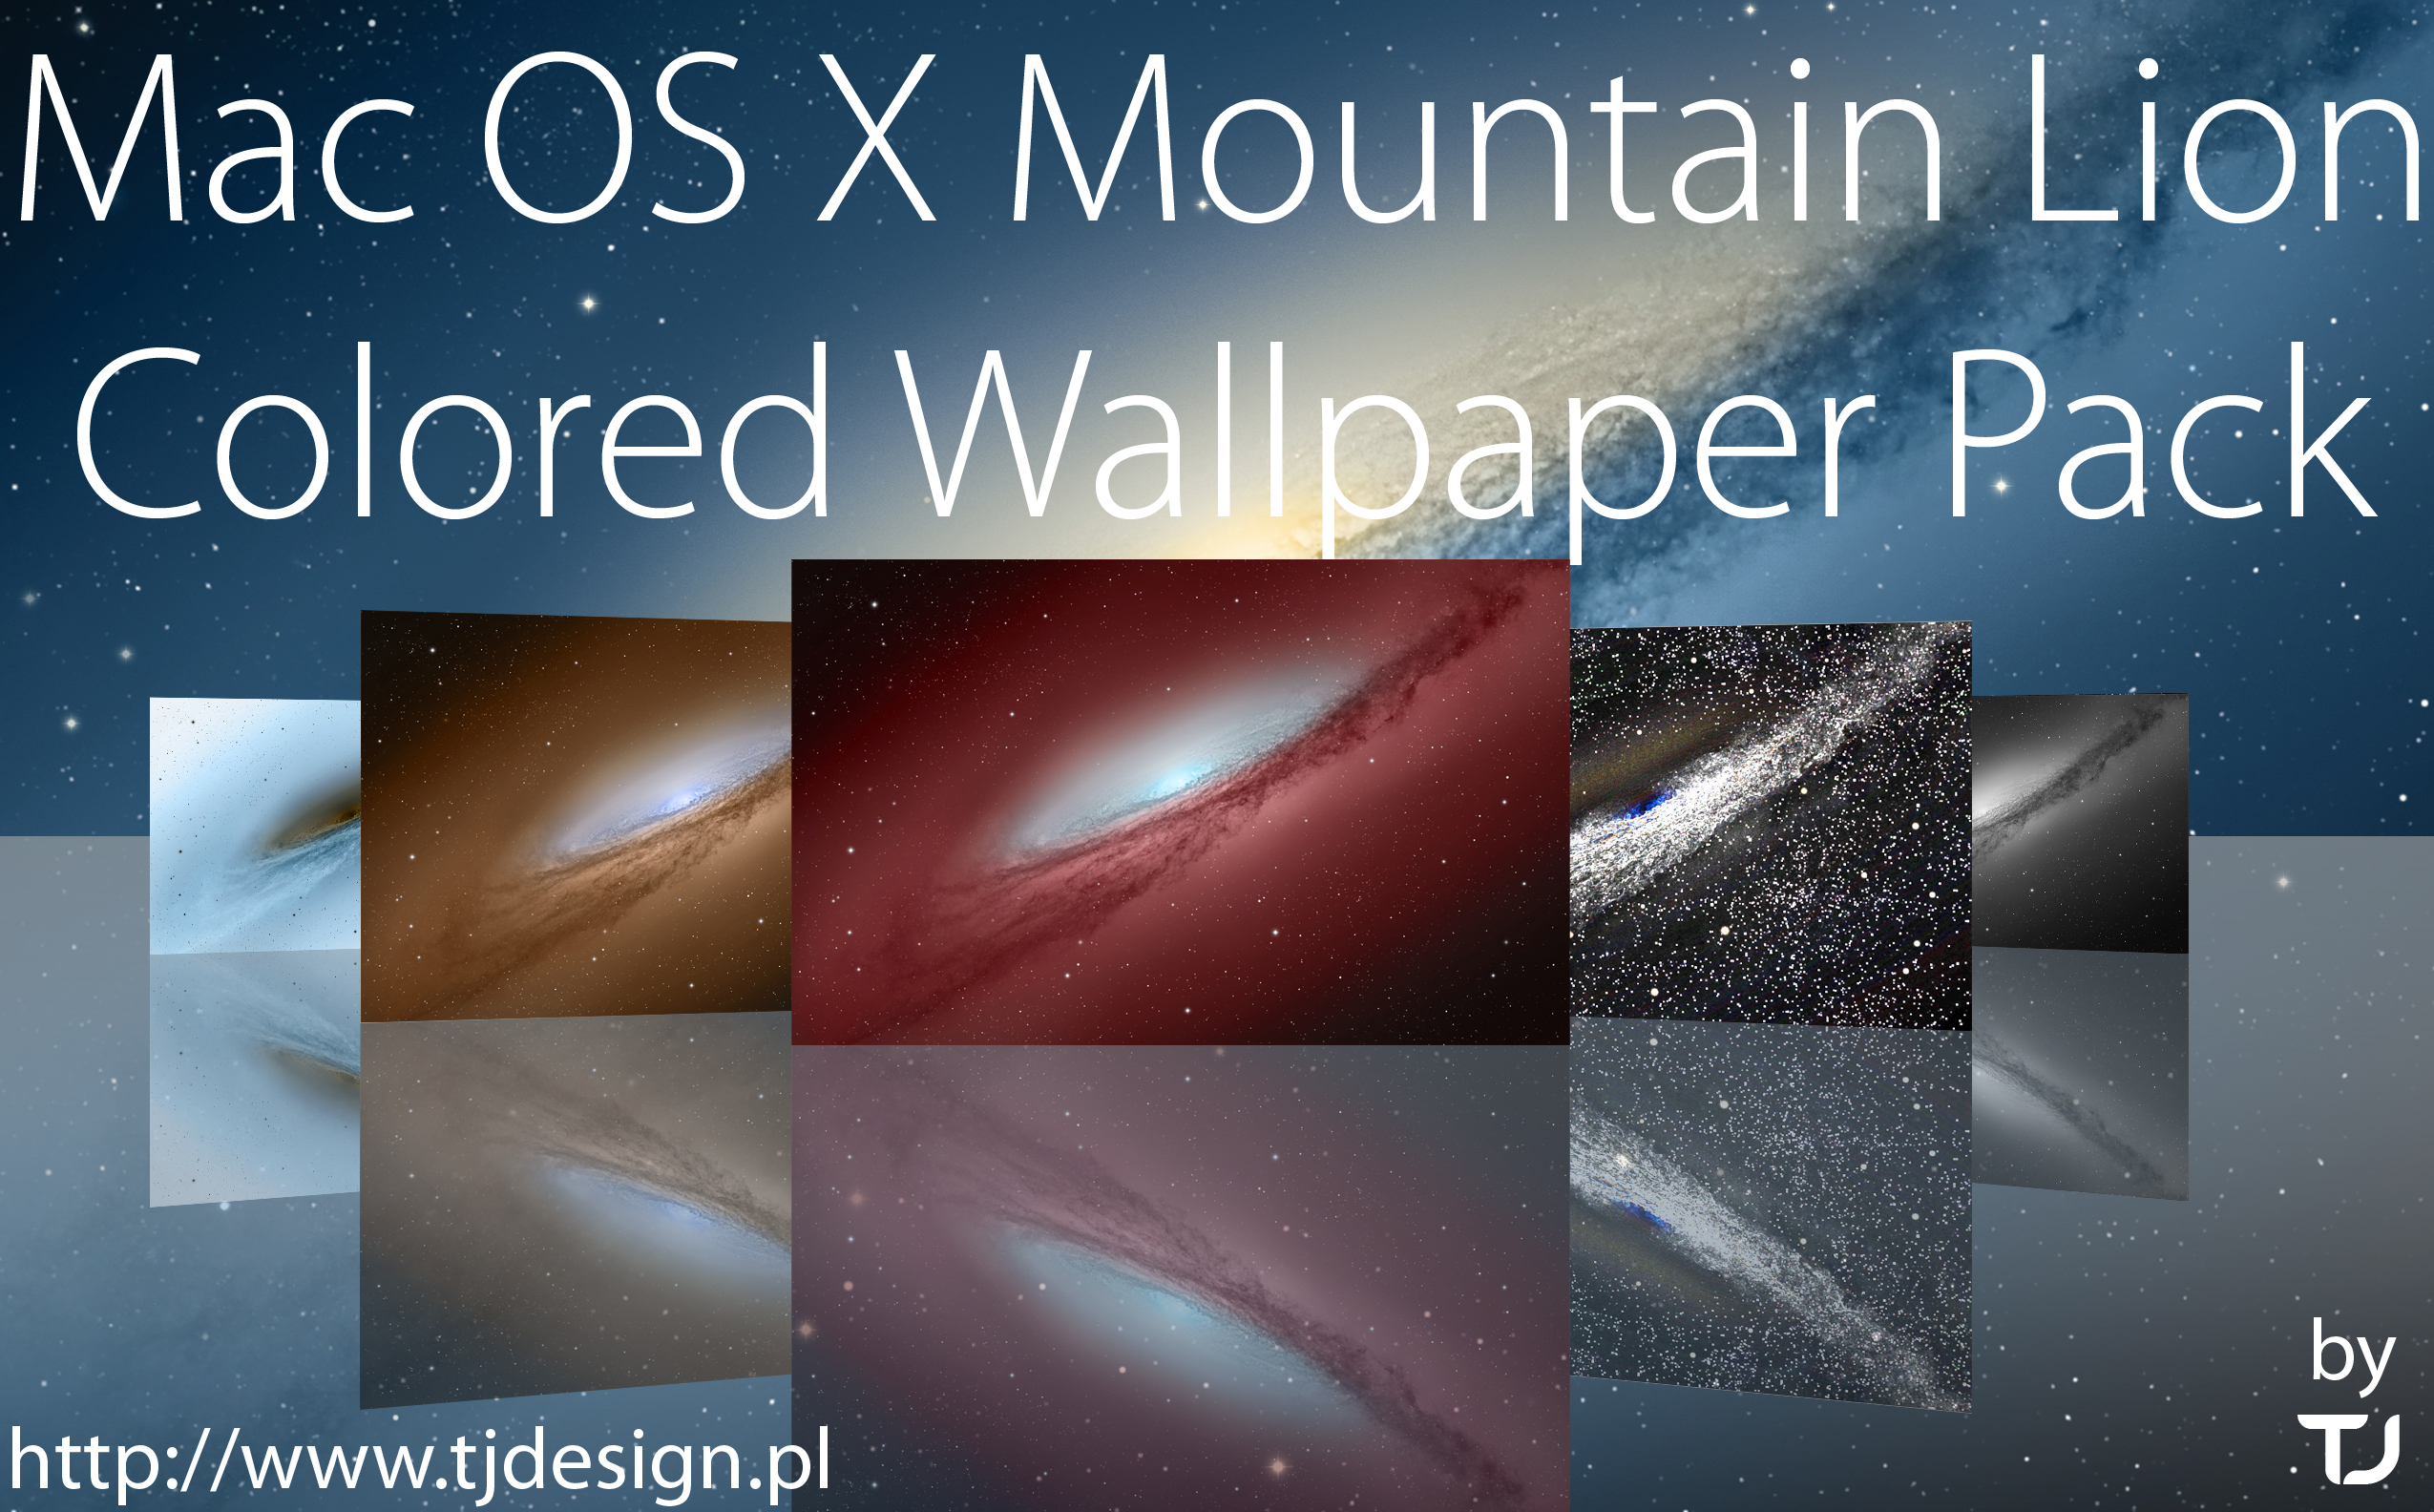 Mac Os X Mountain Lion Colored Wallpaper Pack By T0j